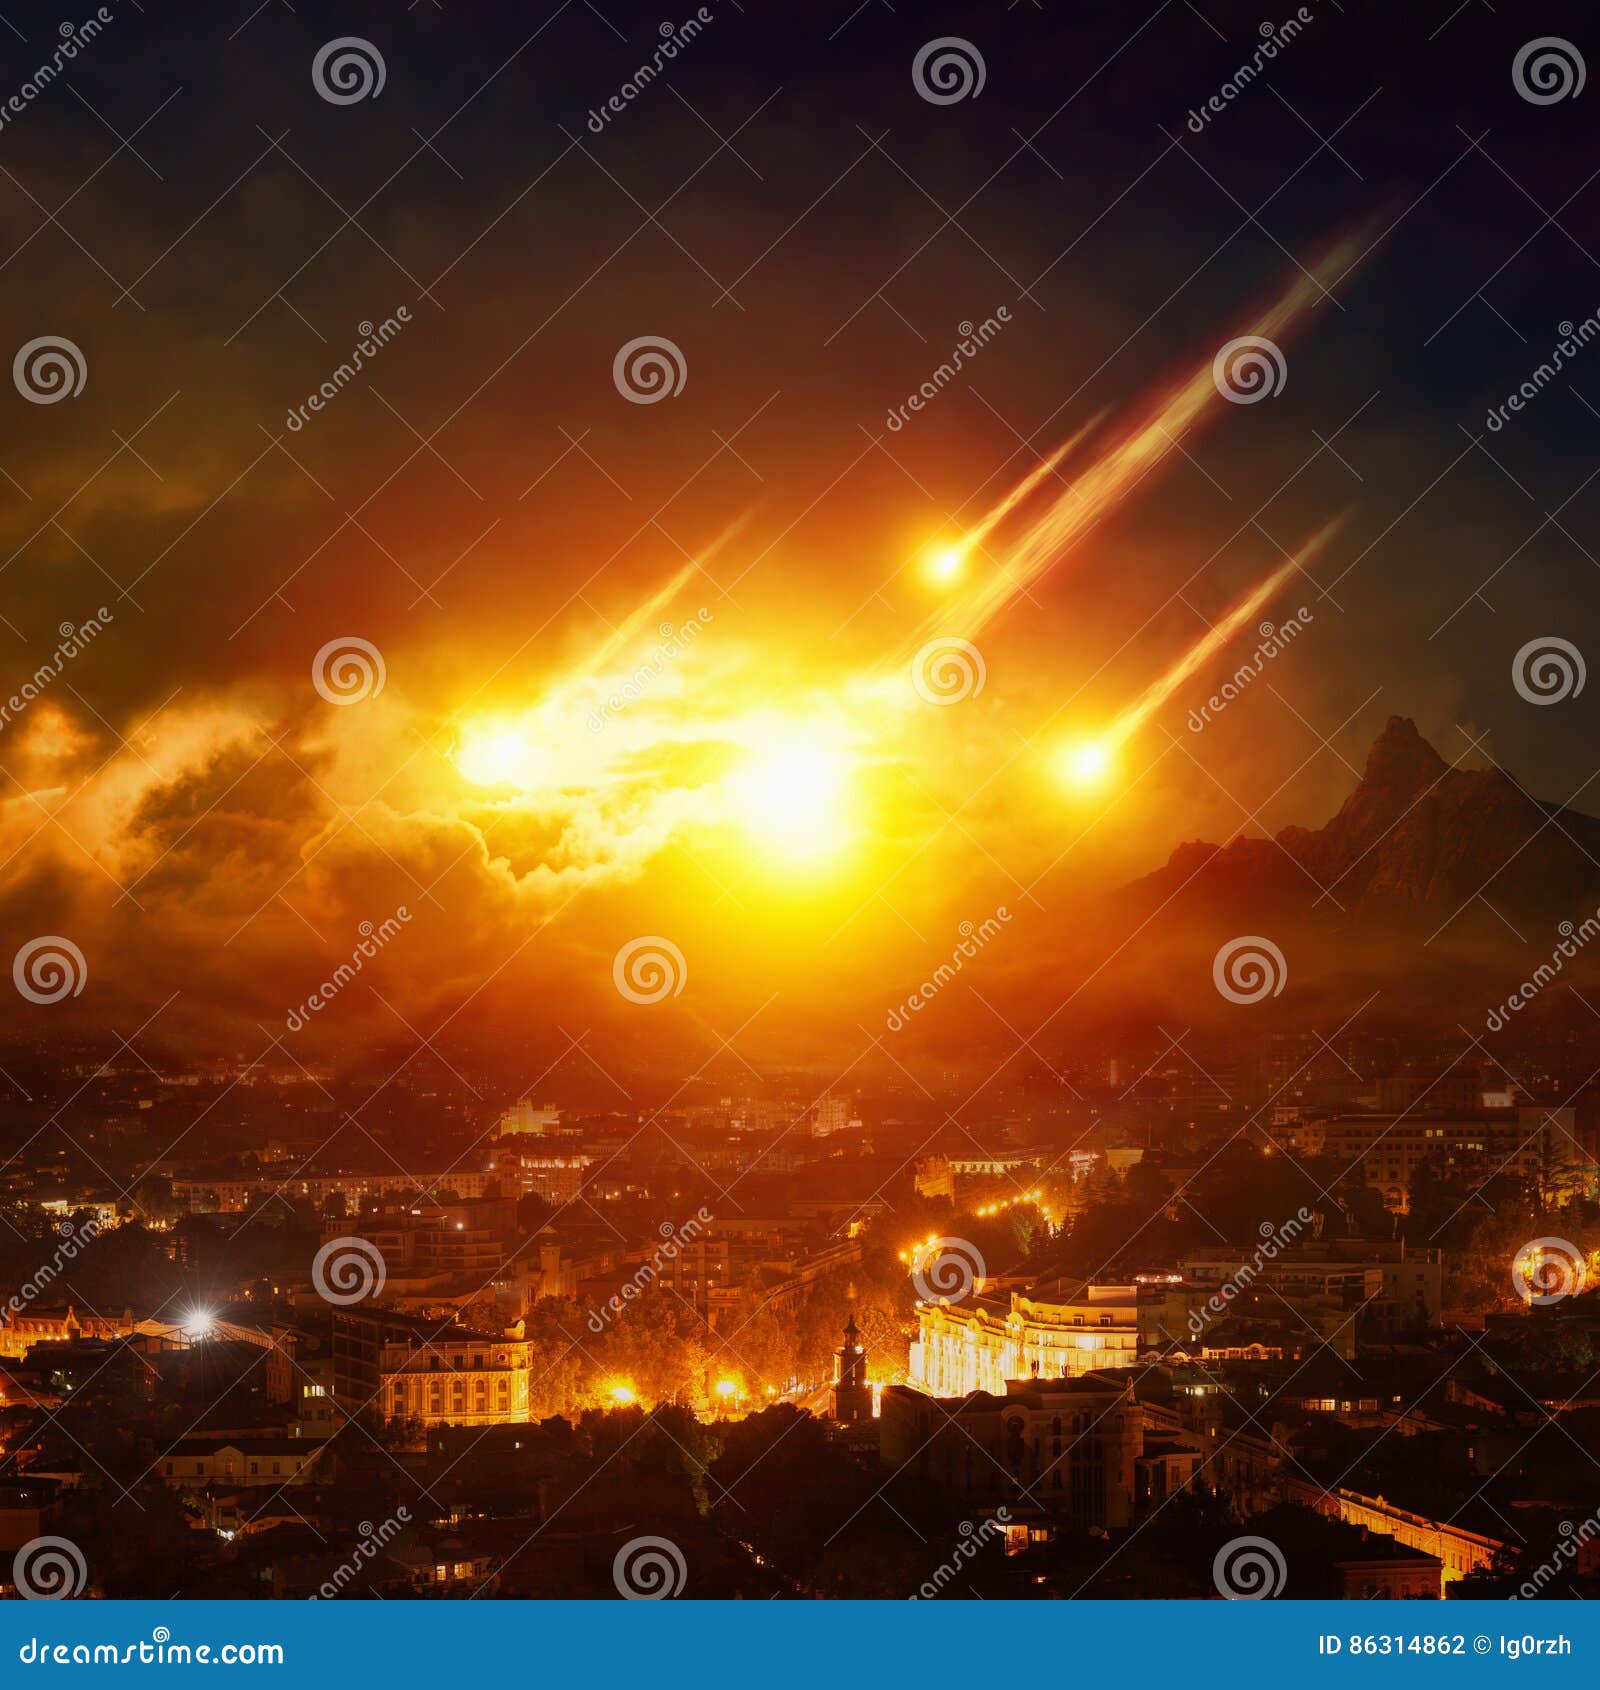 judgment day, end of world, asteroid impact